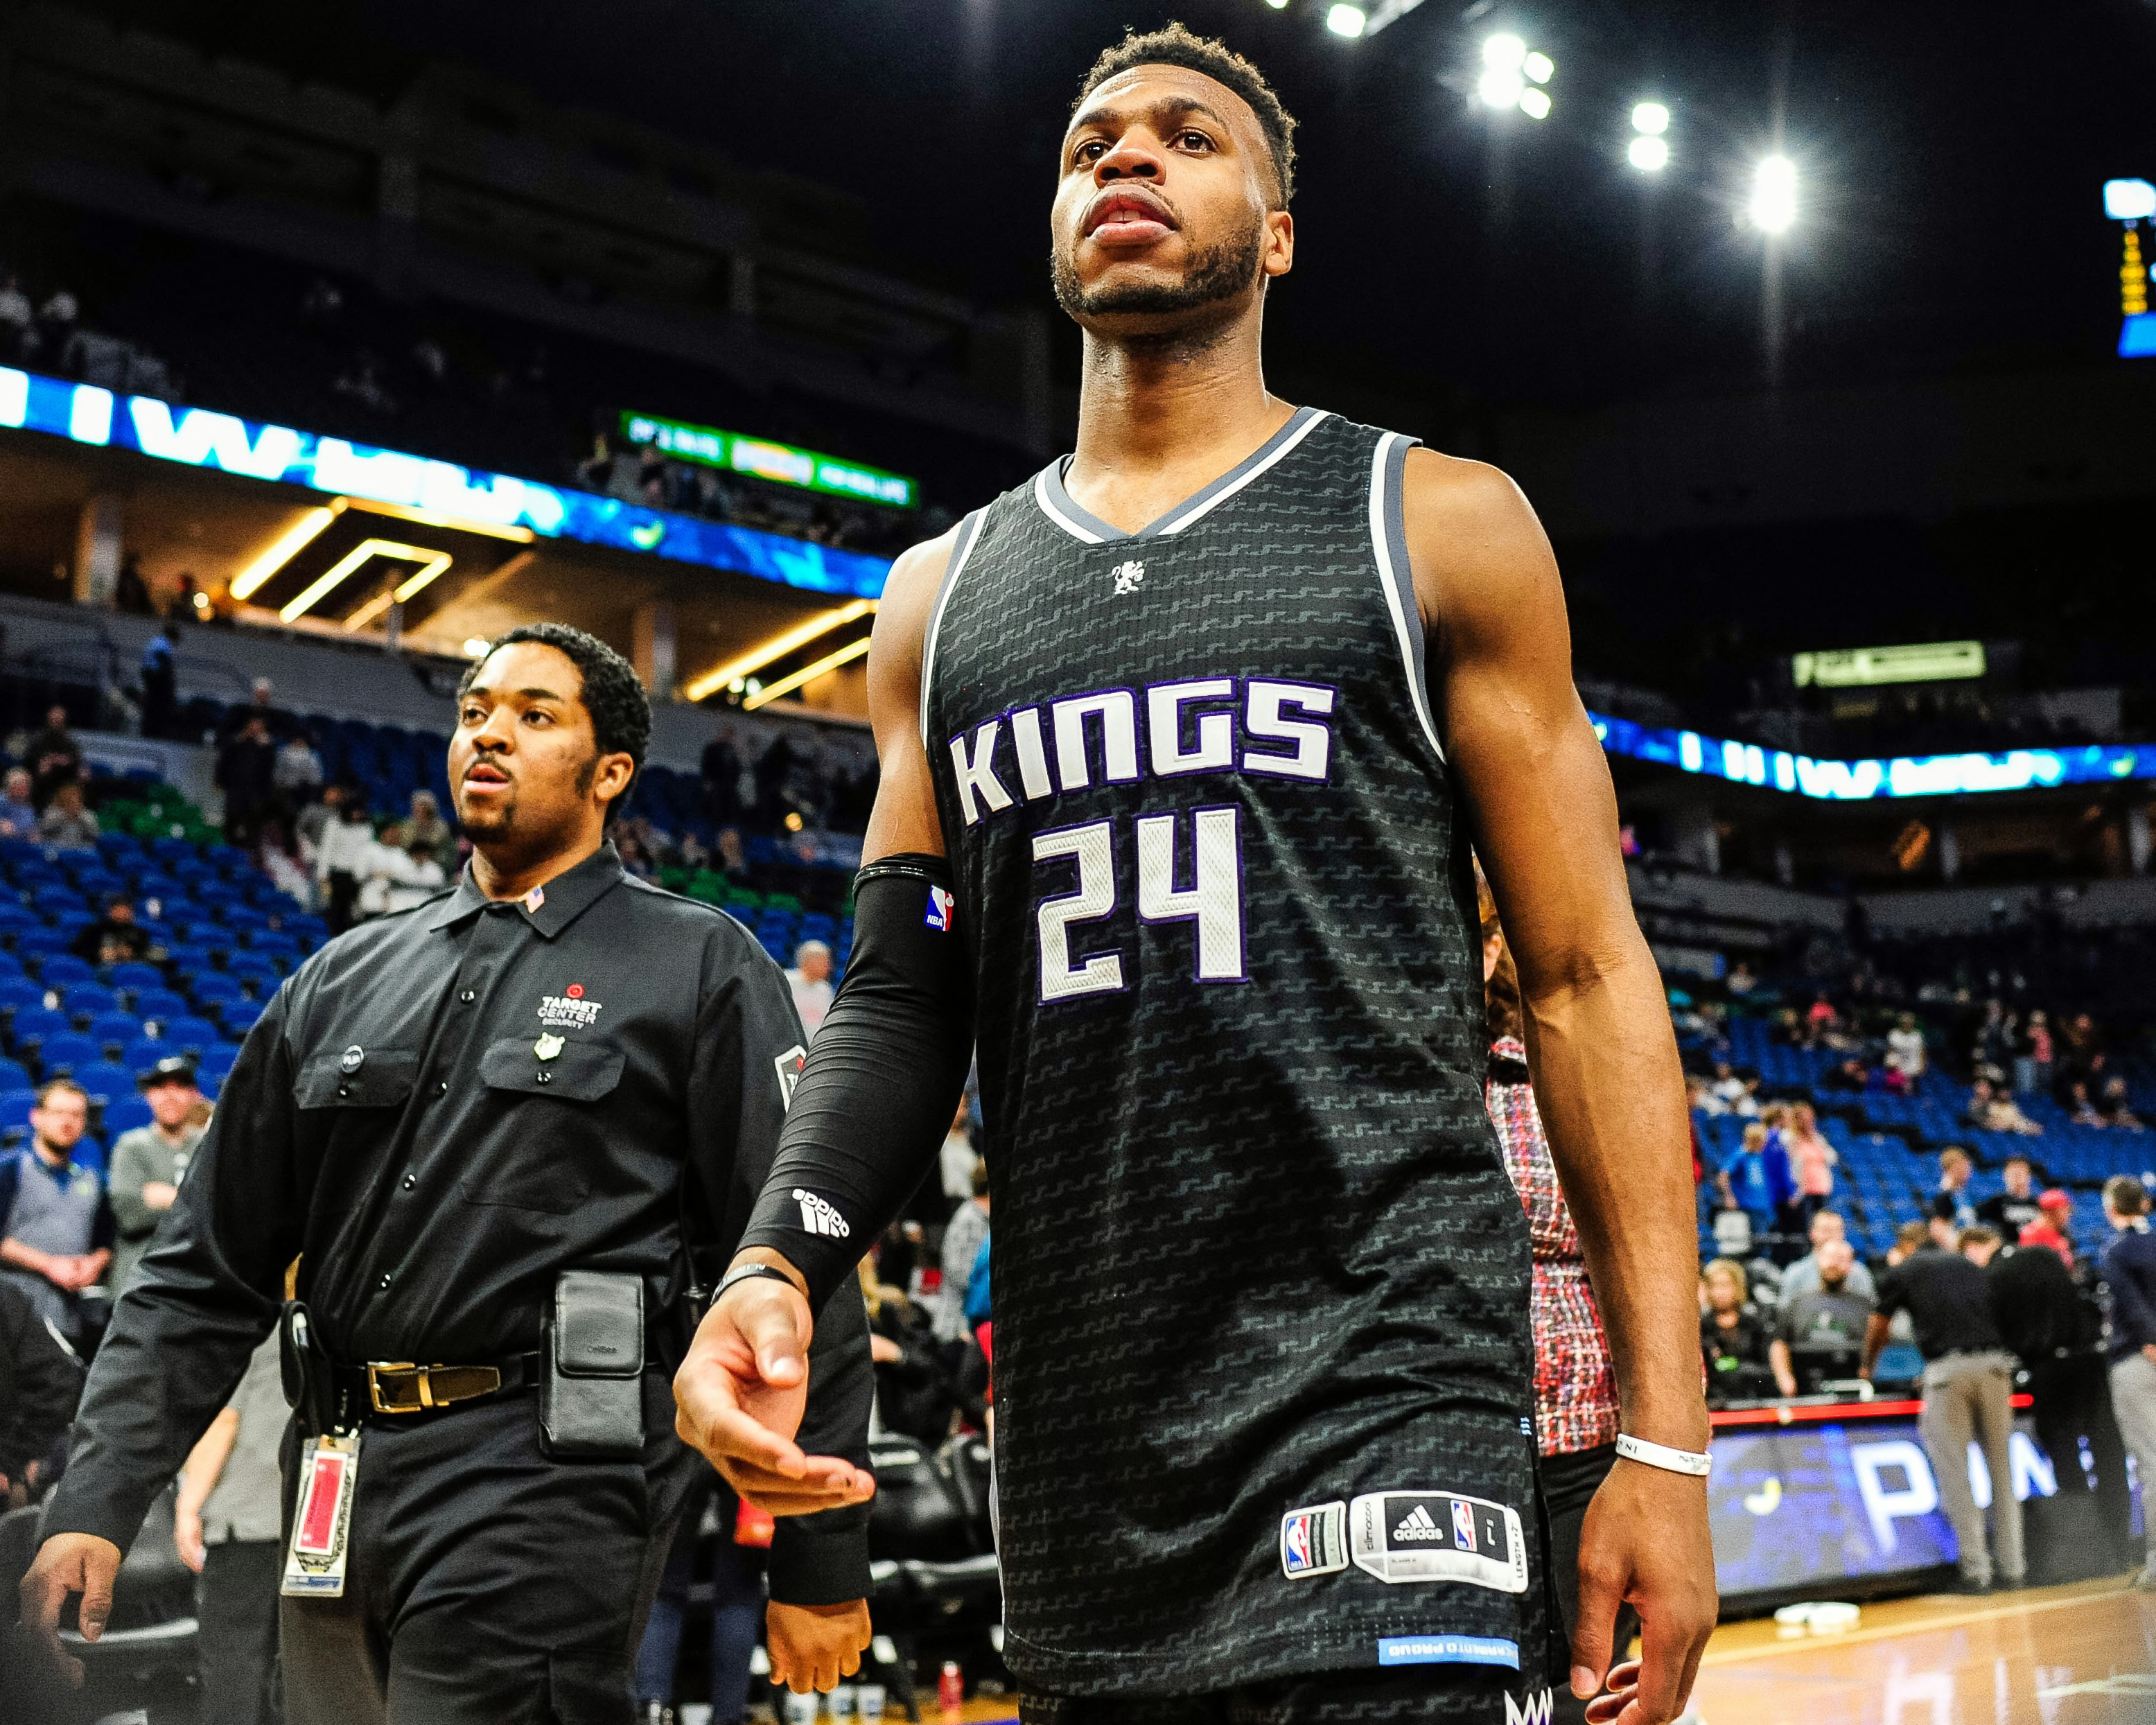 Grading Each Player on the Current Sacramento Kings Roster Page 12